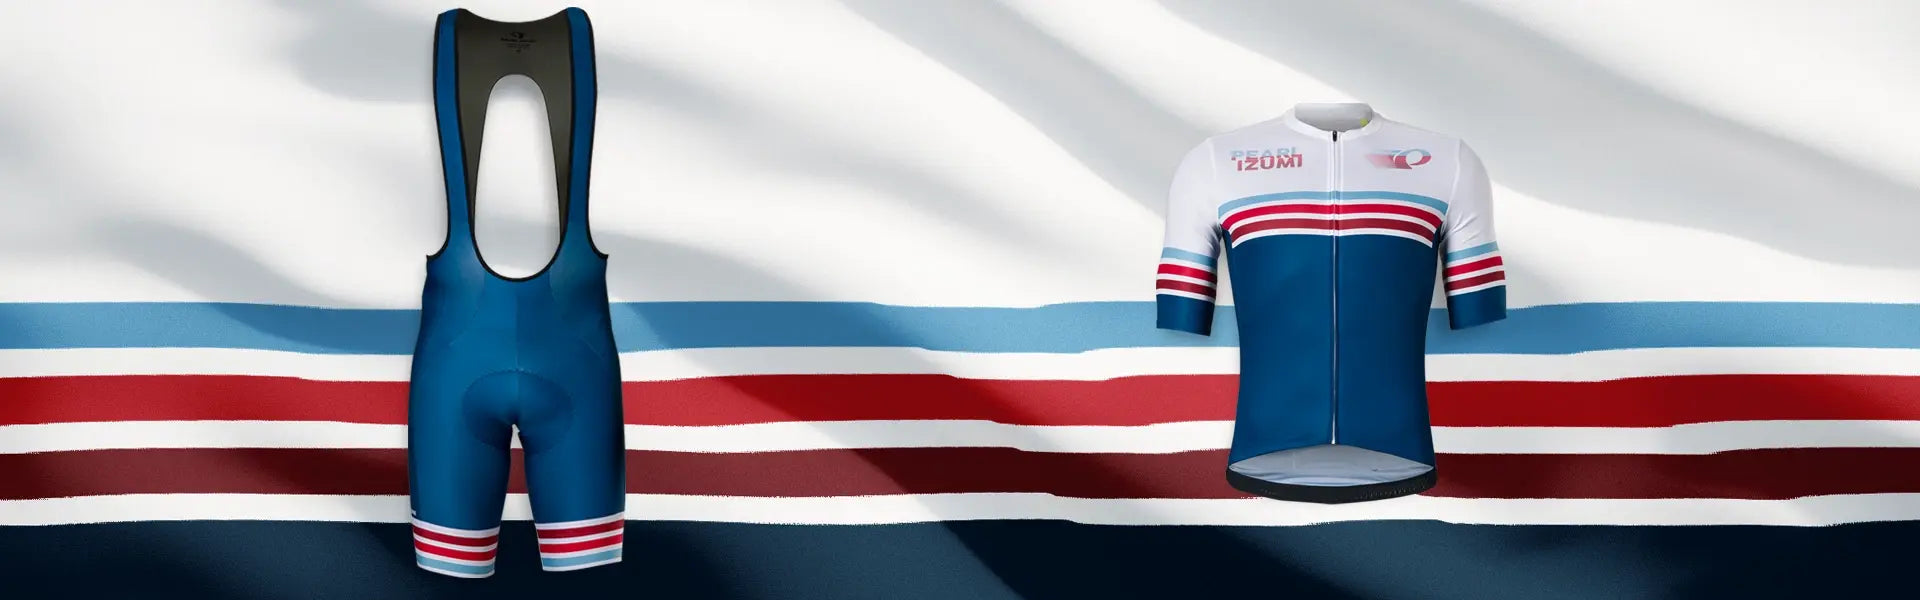 background banner for PEARL iZUMi limited edition kit for Americana Collection. Picture of navy bibs with red, white and blue stripes on left, and jersey with stripes on right